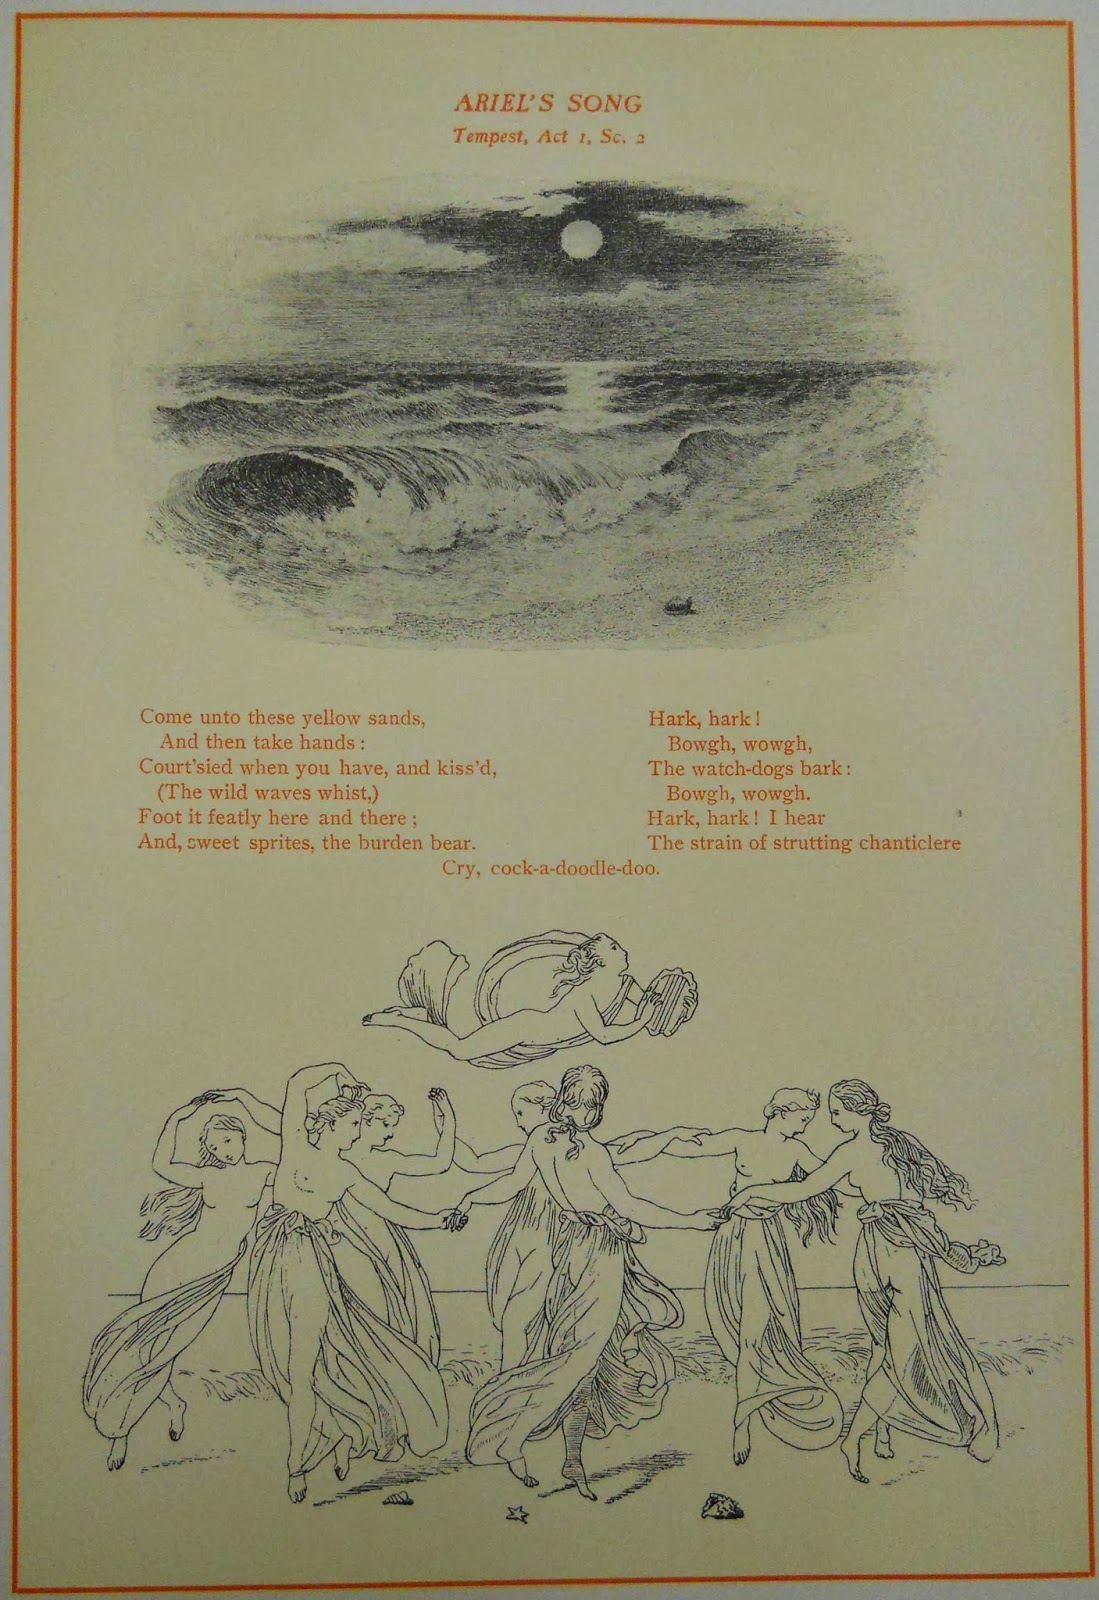 From the Rare Print Collection, "Ariel" from "The Tempest" with illustrations of crashing waves under a full moon (above), and women dancing with an angel above them (lower illustration).